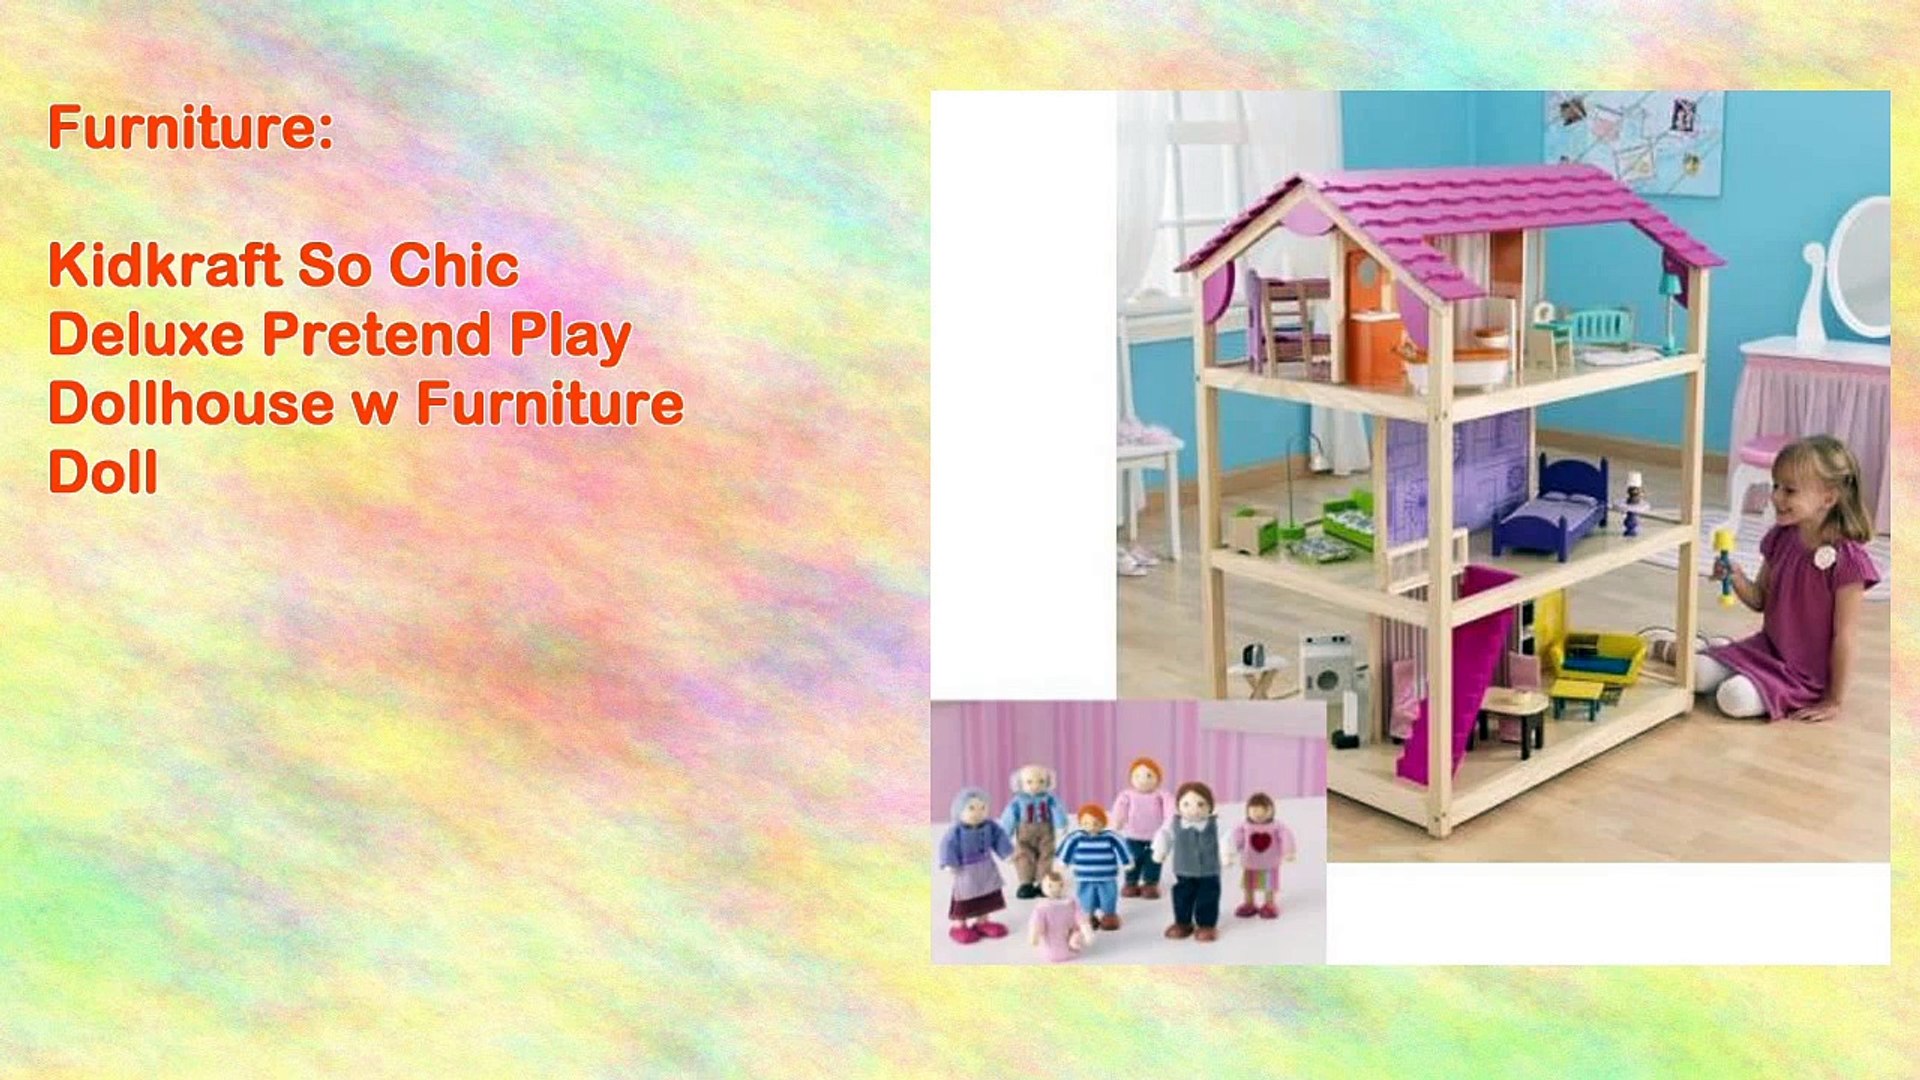 Kidkraft So Chic Deluxe Pretend Play Dollhouse W Furniture Doll